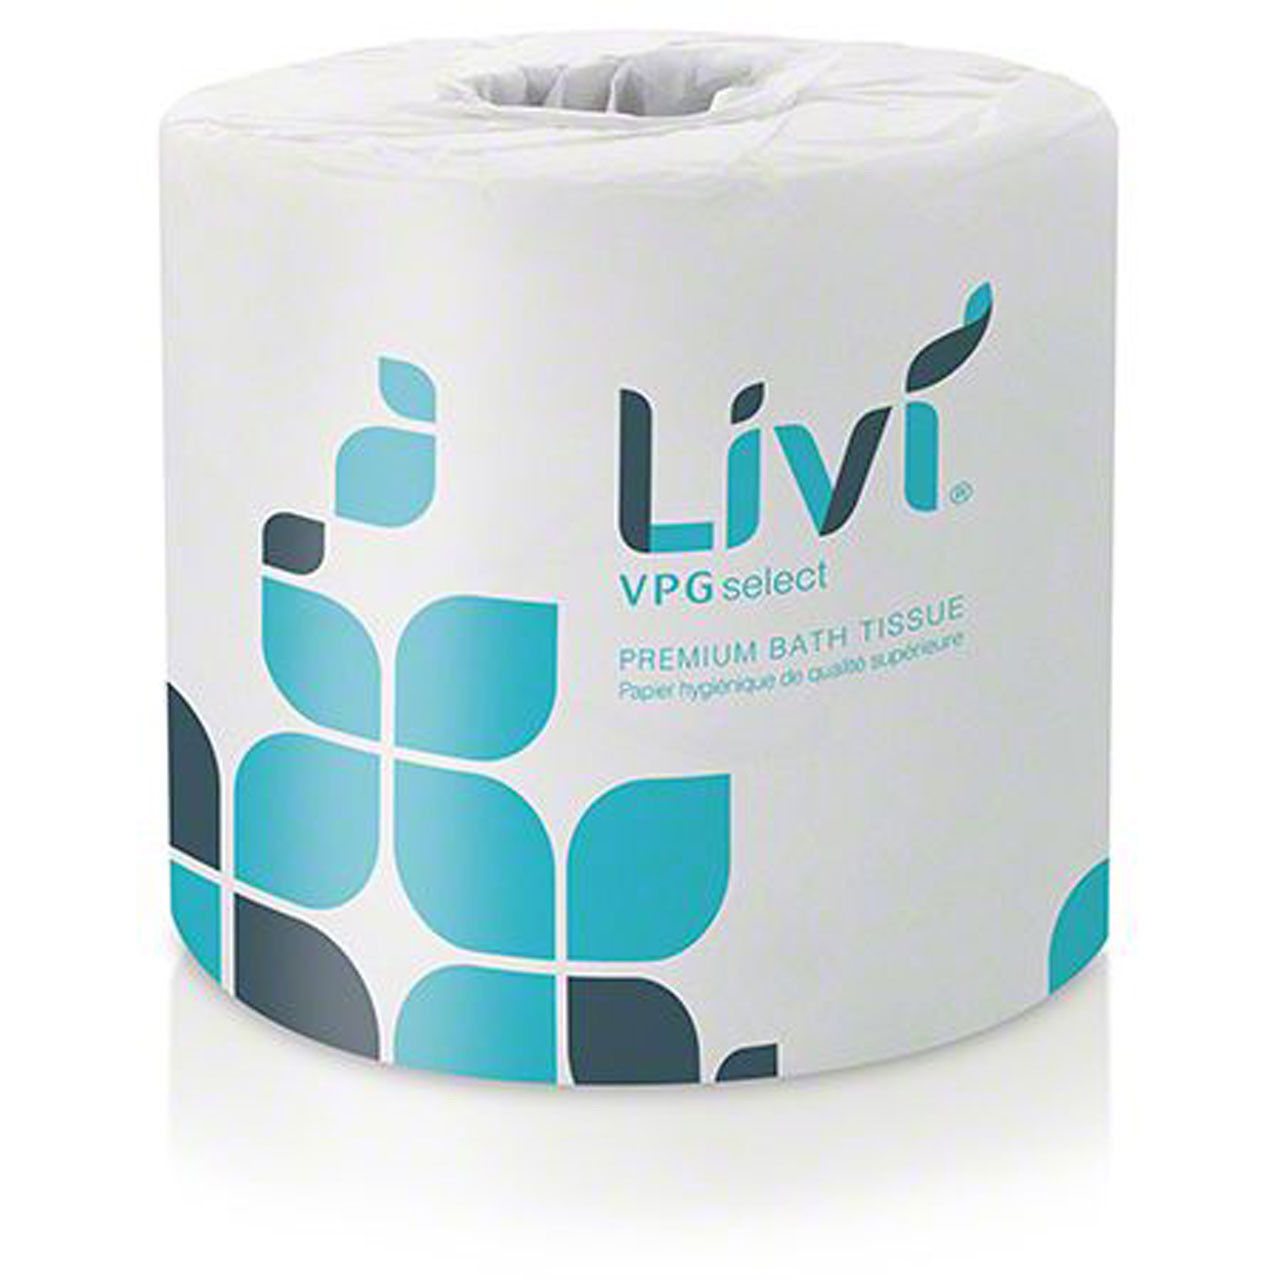 How is the Solaris Paper Livi VPG Select Toilet Tissue 2/ply embossed?